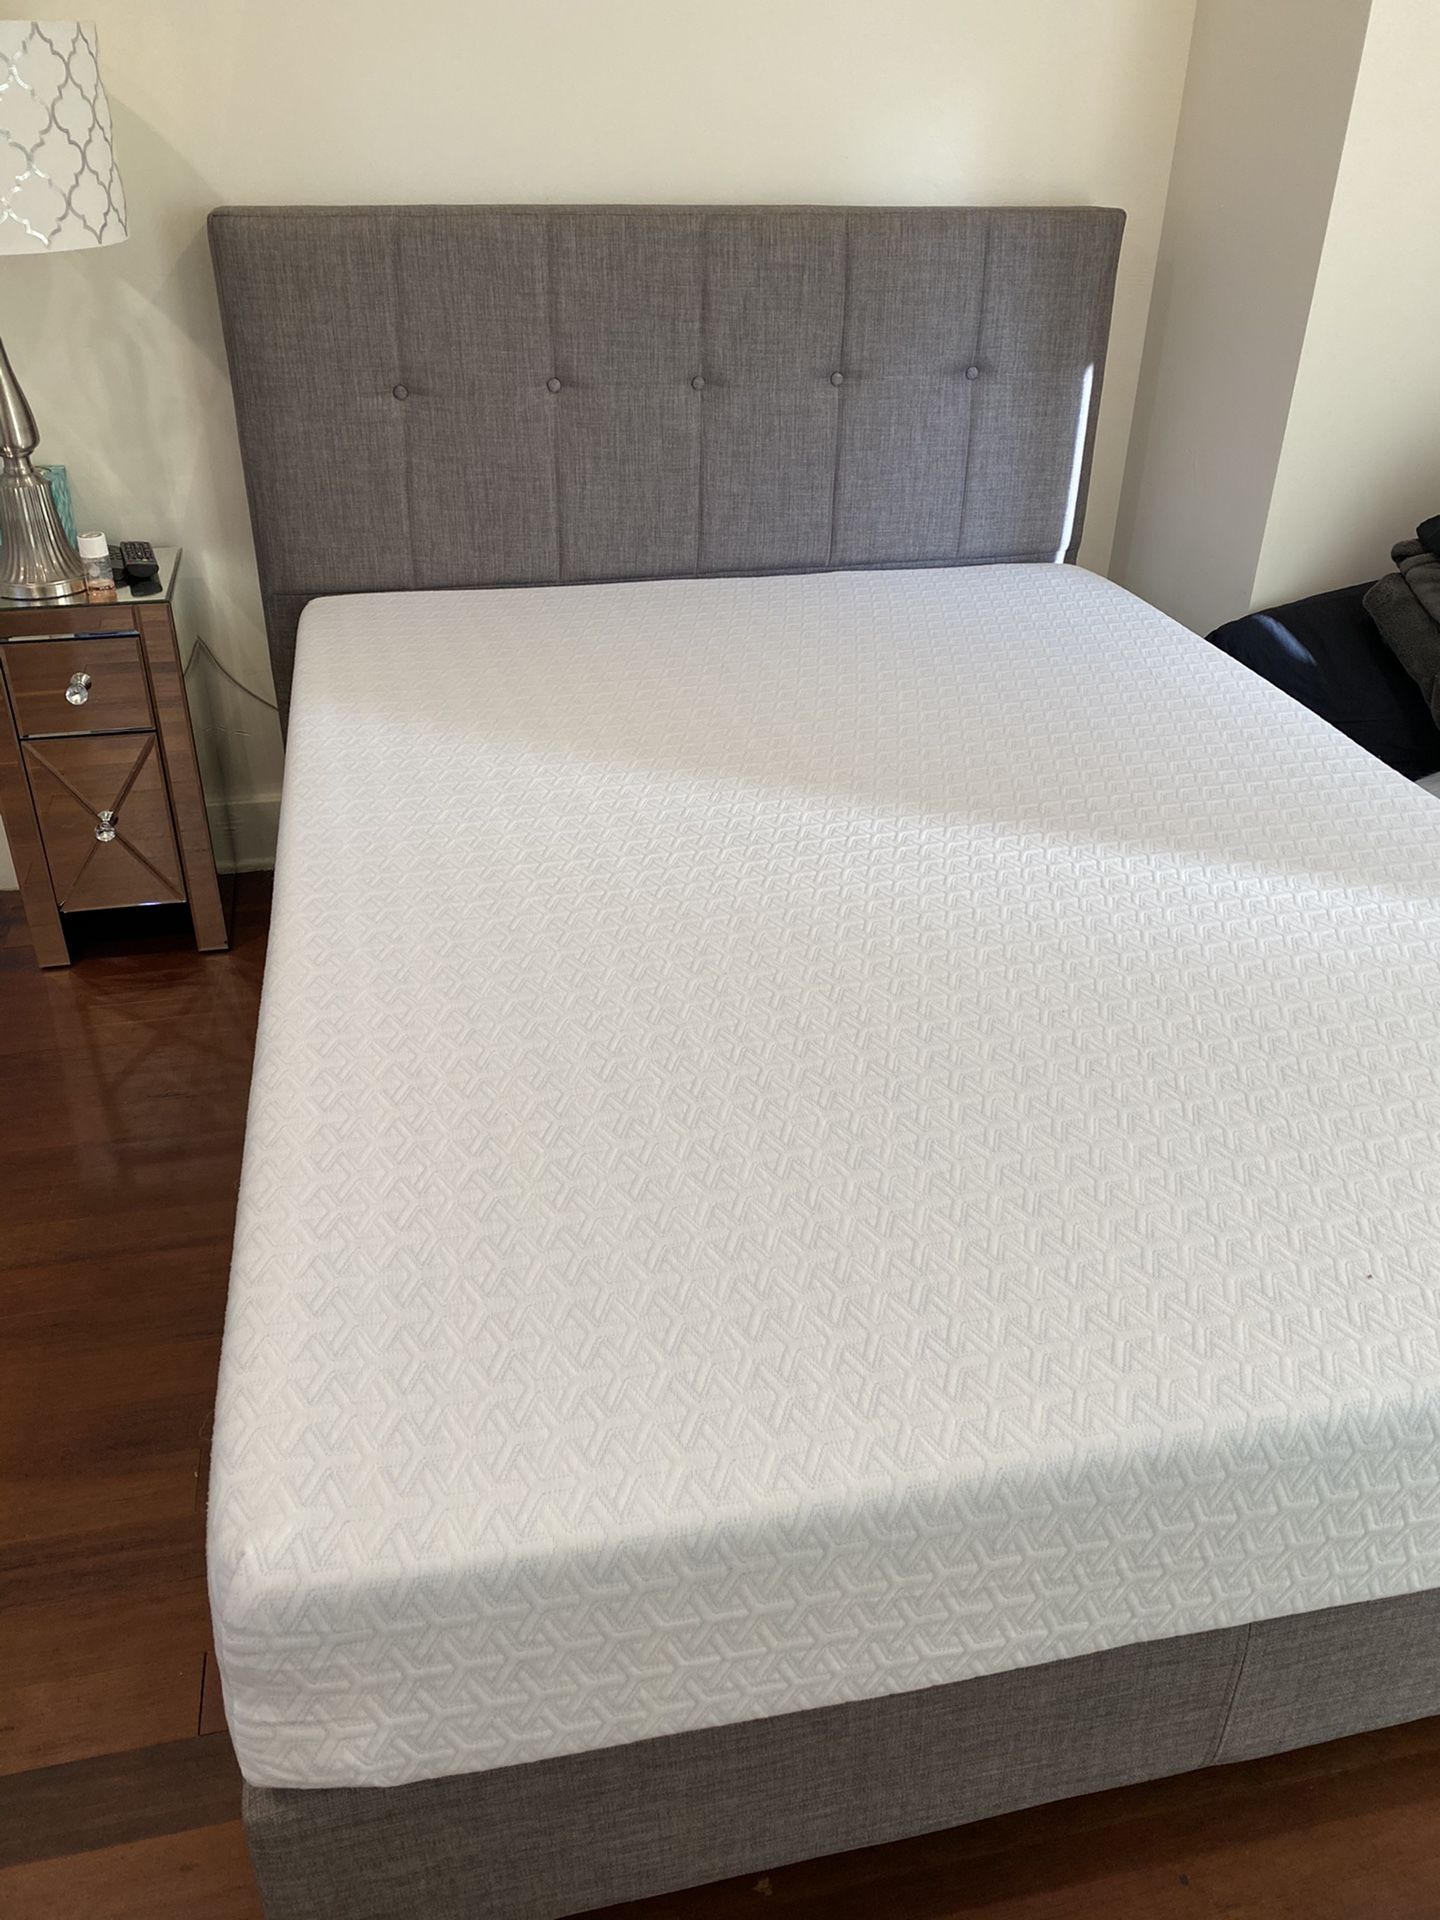 Full bed frame with mattress